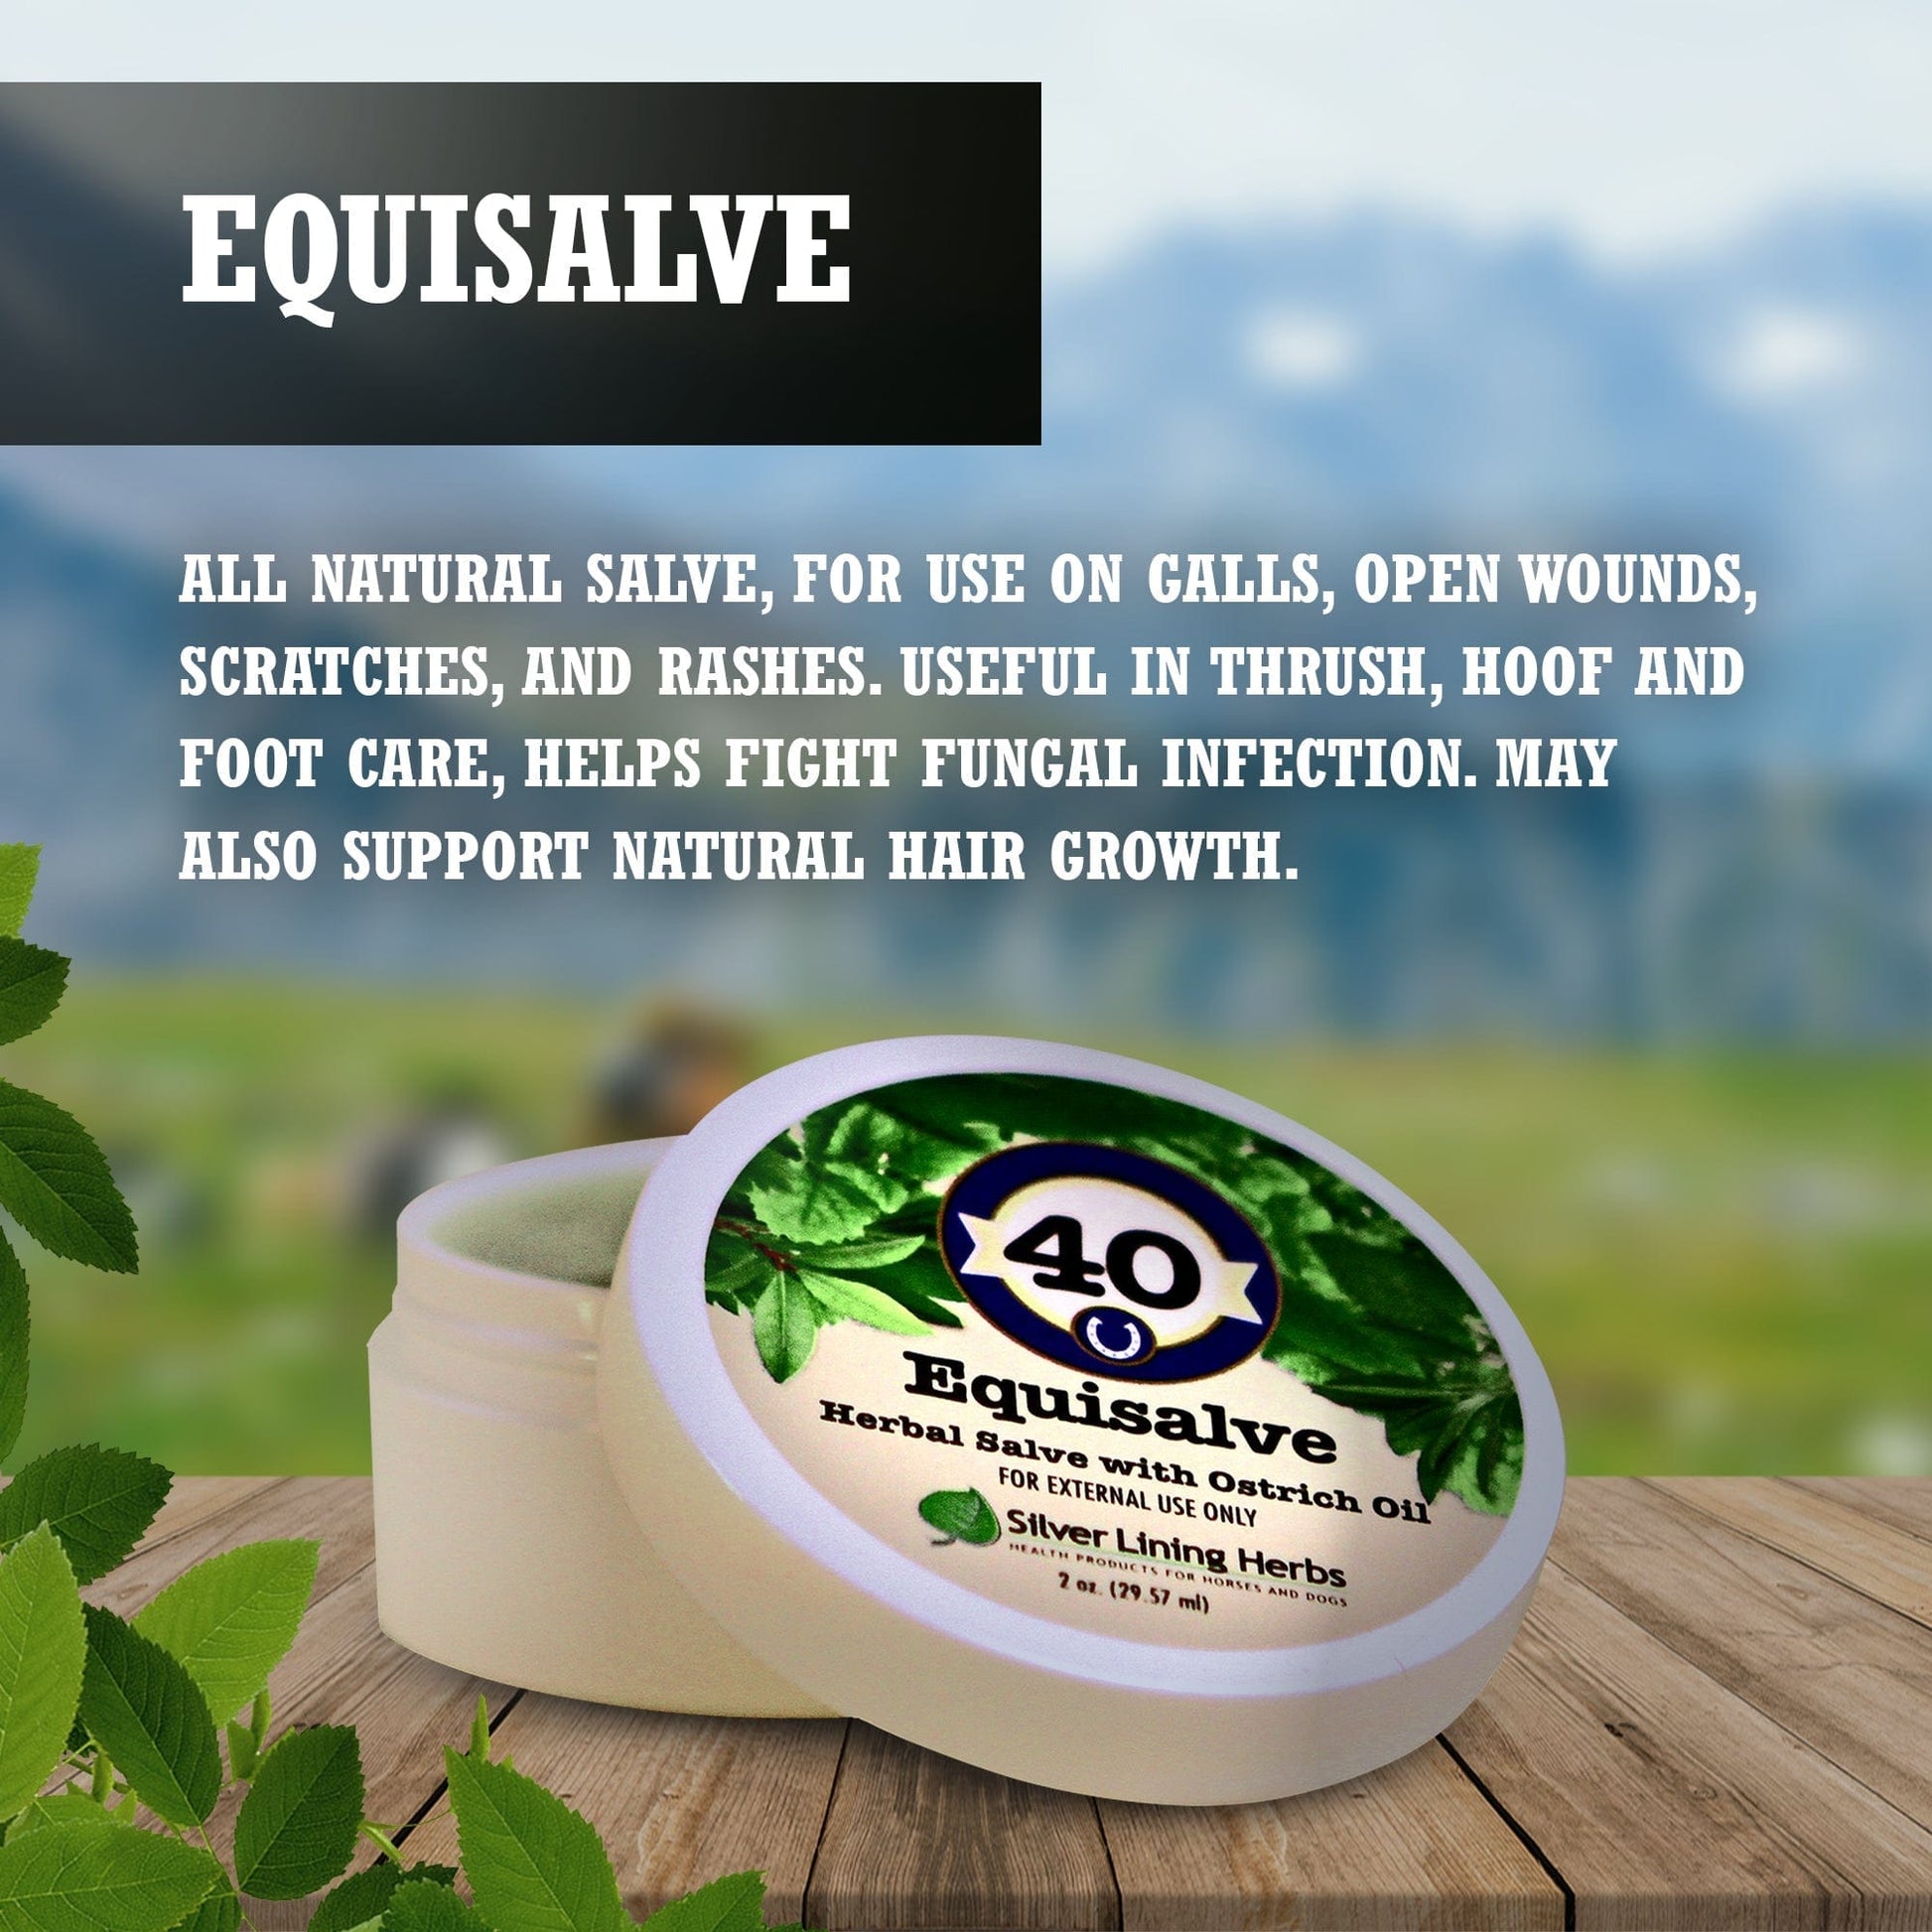 Equisalve - Silver Lining Herbs